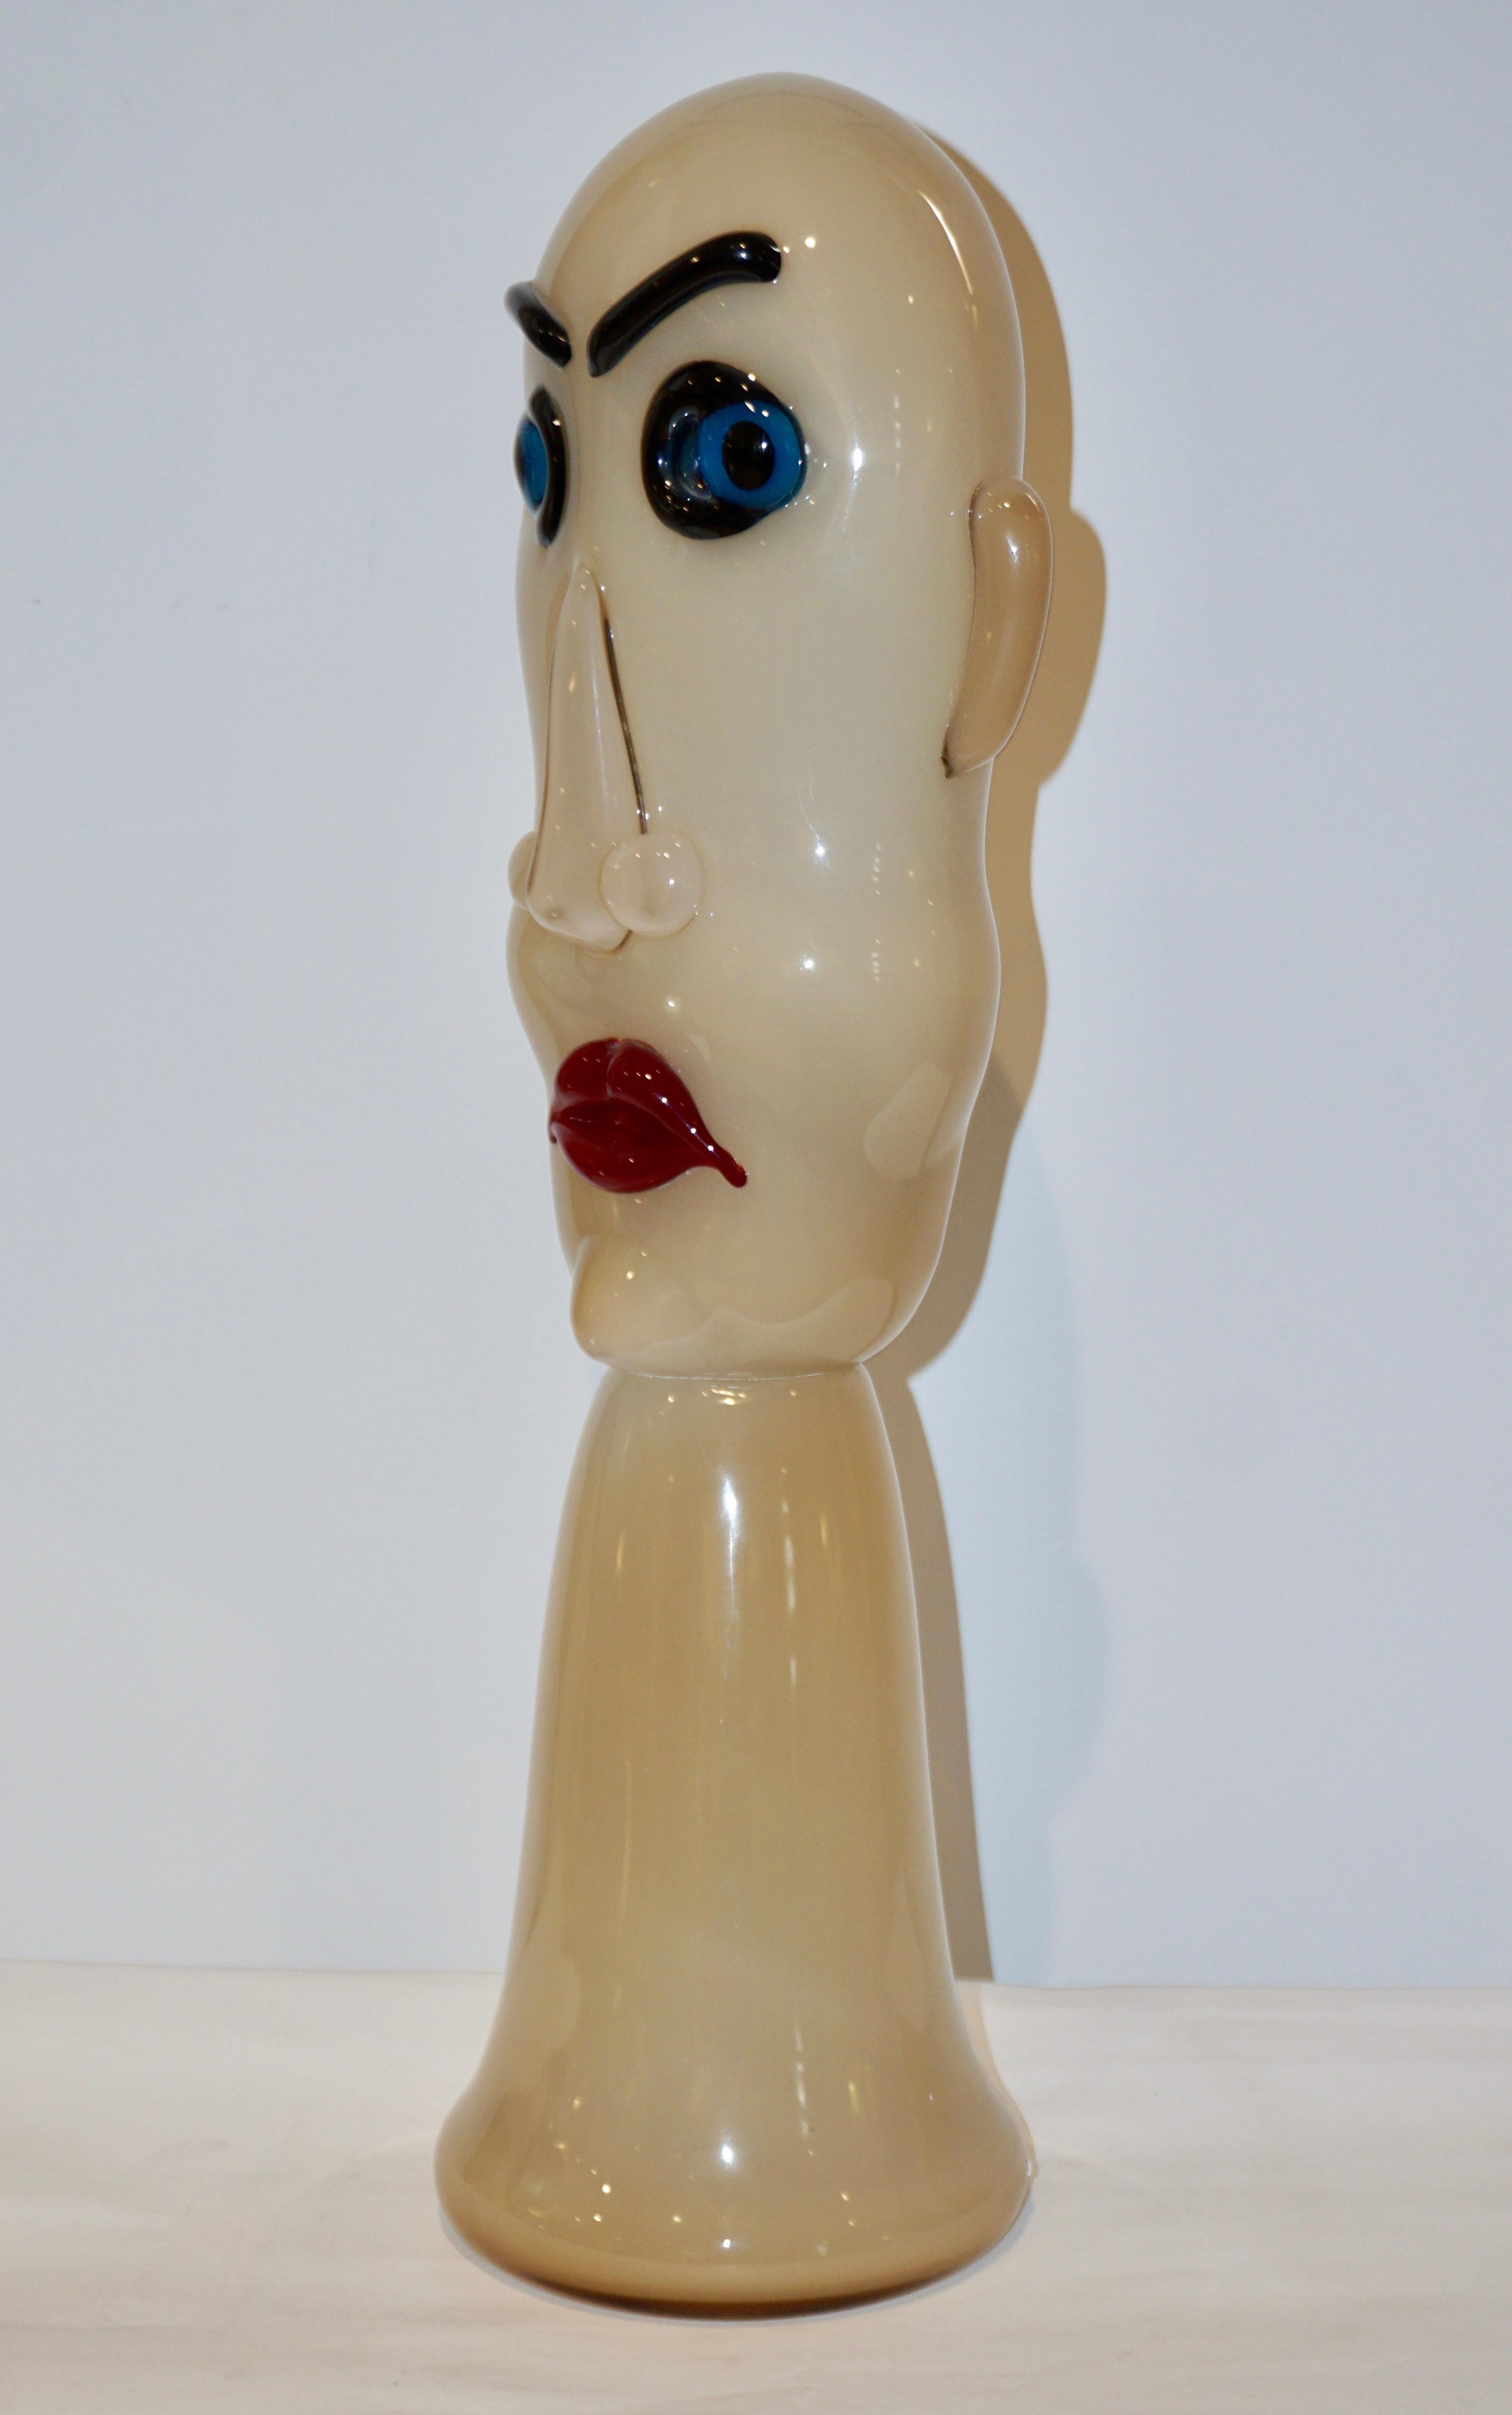 One 1980s, modernist dynamic, comic mouth blown head sculpture in colored Murano glass, in ivory milk white, the face with blue eyes and red lips. This production has been very limited, each piece individually crafted so that each head is different